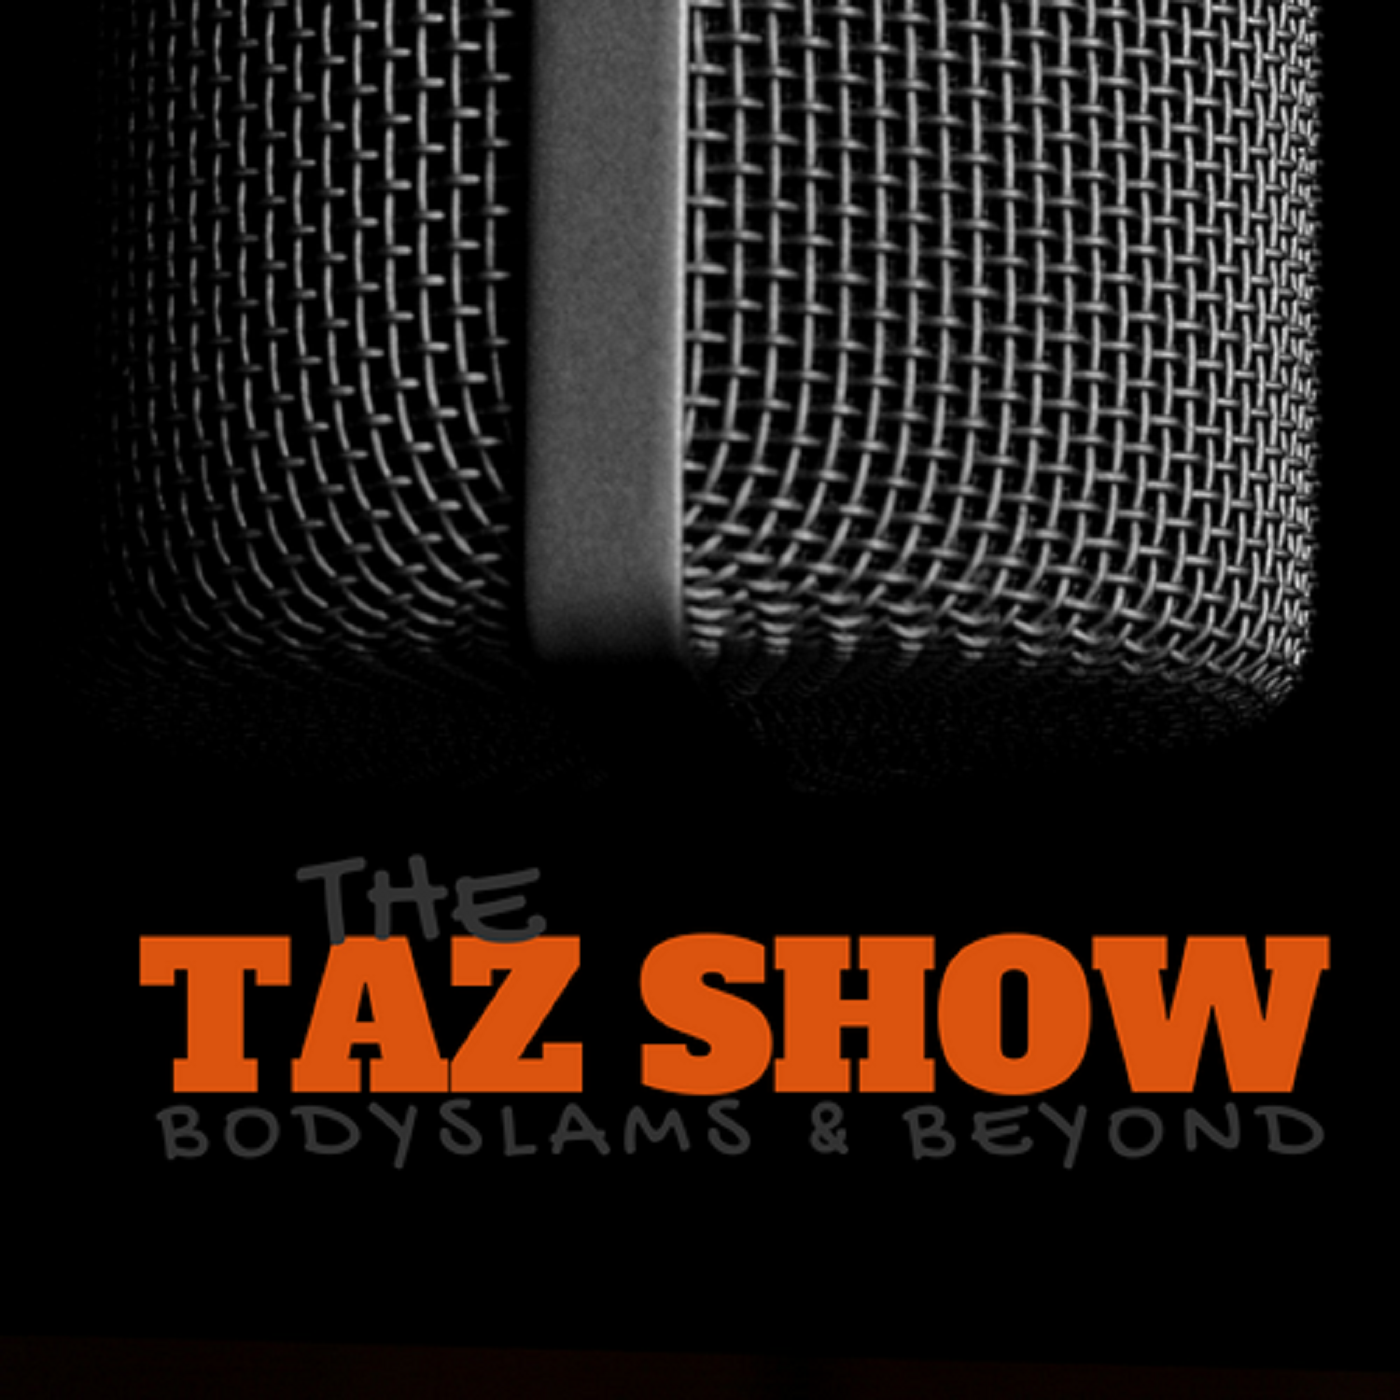 The Taz Show RAW Recap and more!